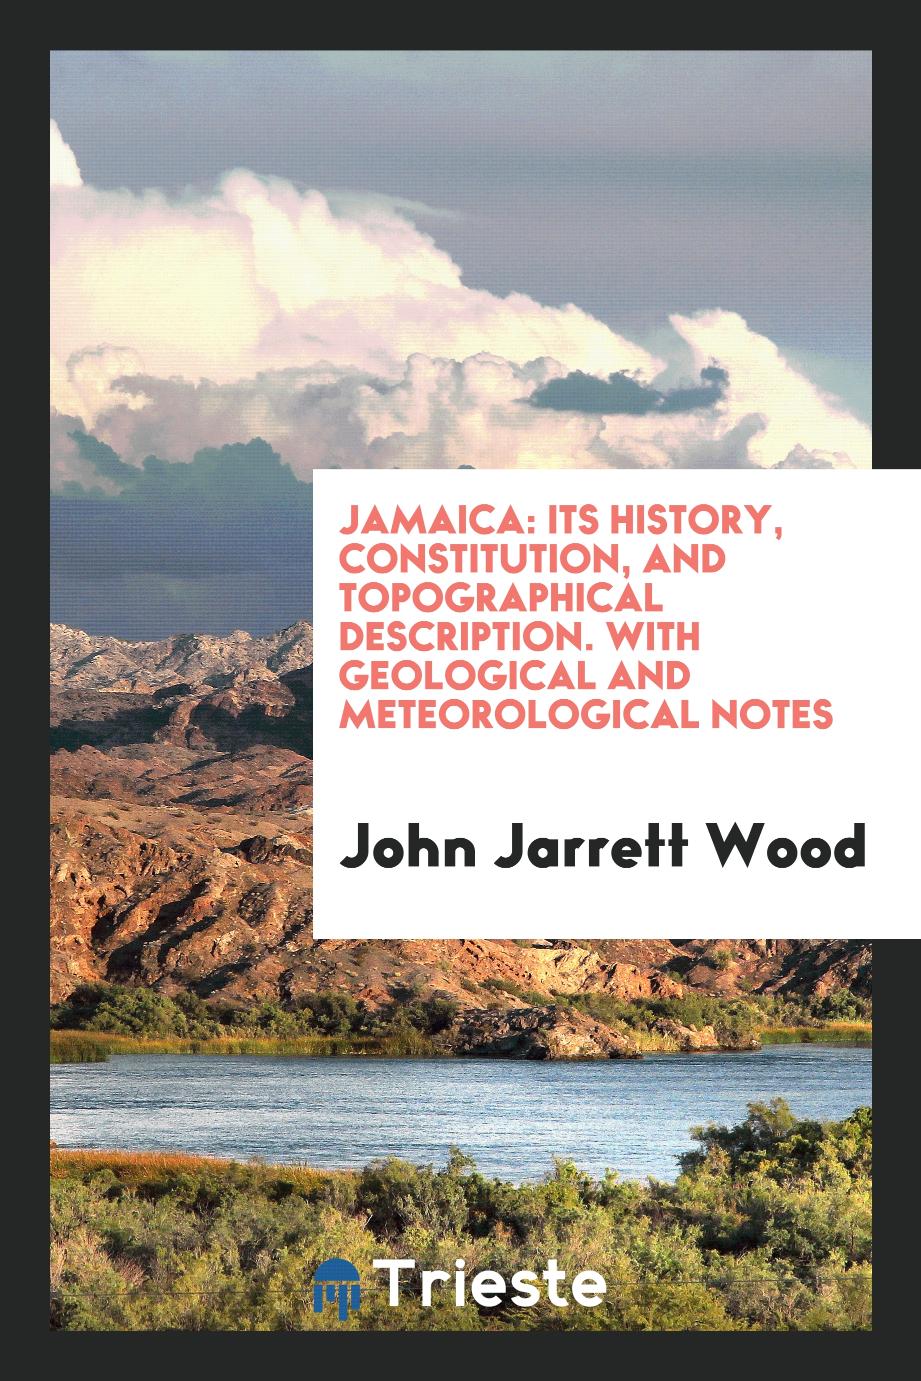 Jamaica: Its History, Constitution, and Topographical Description. With Geological and Meteorological Notes